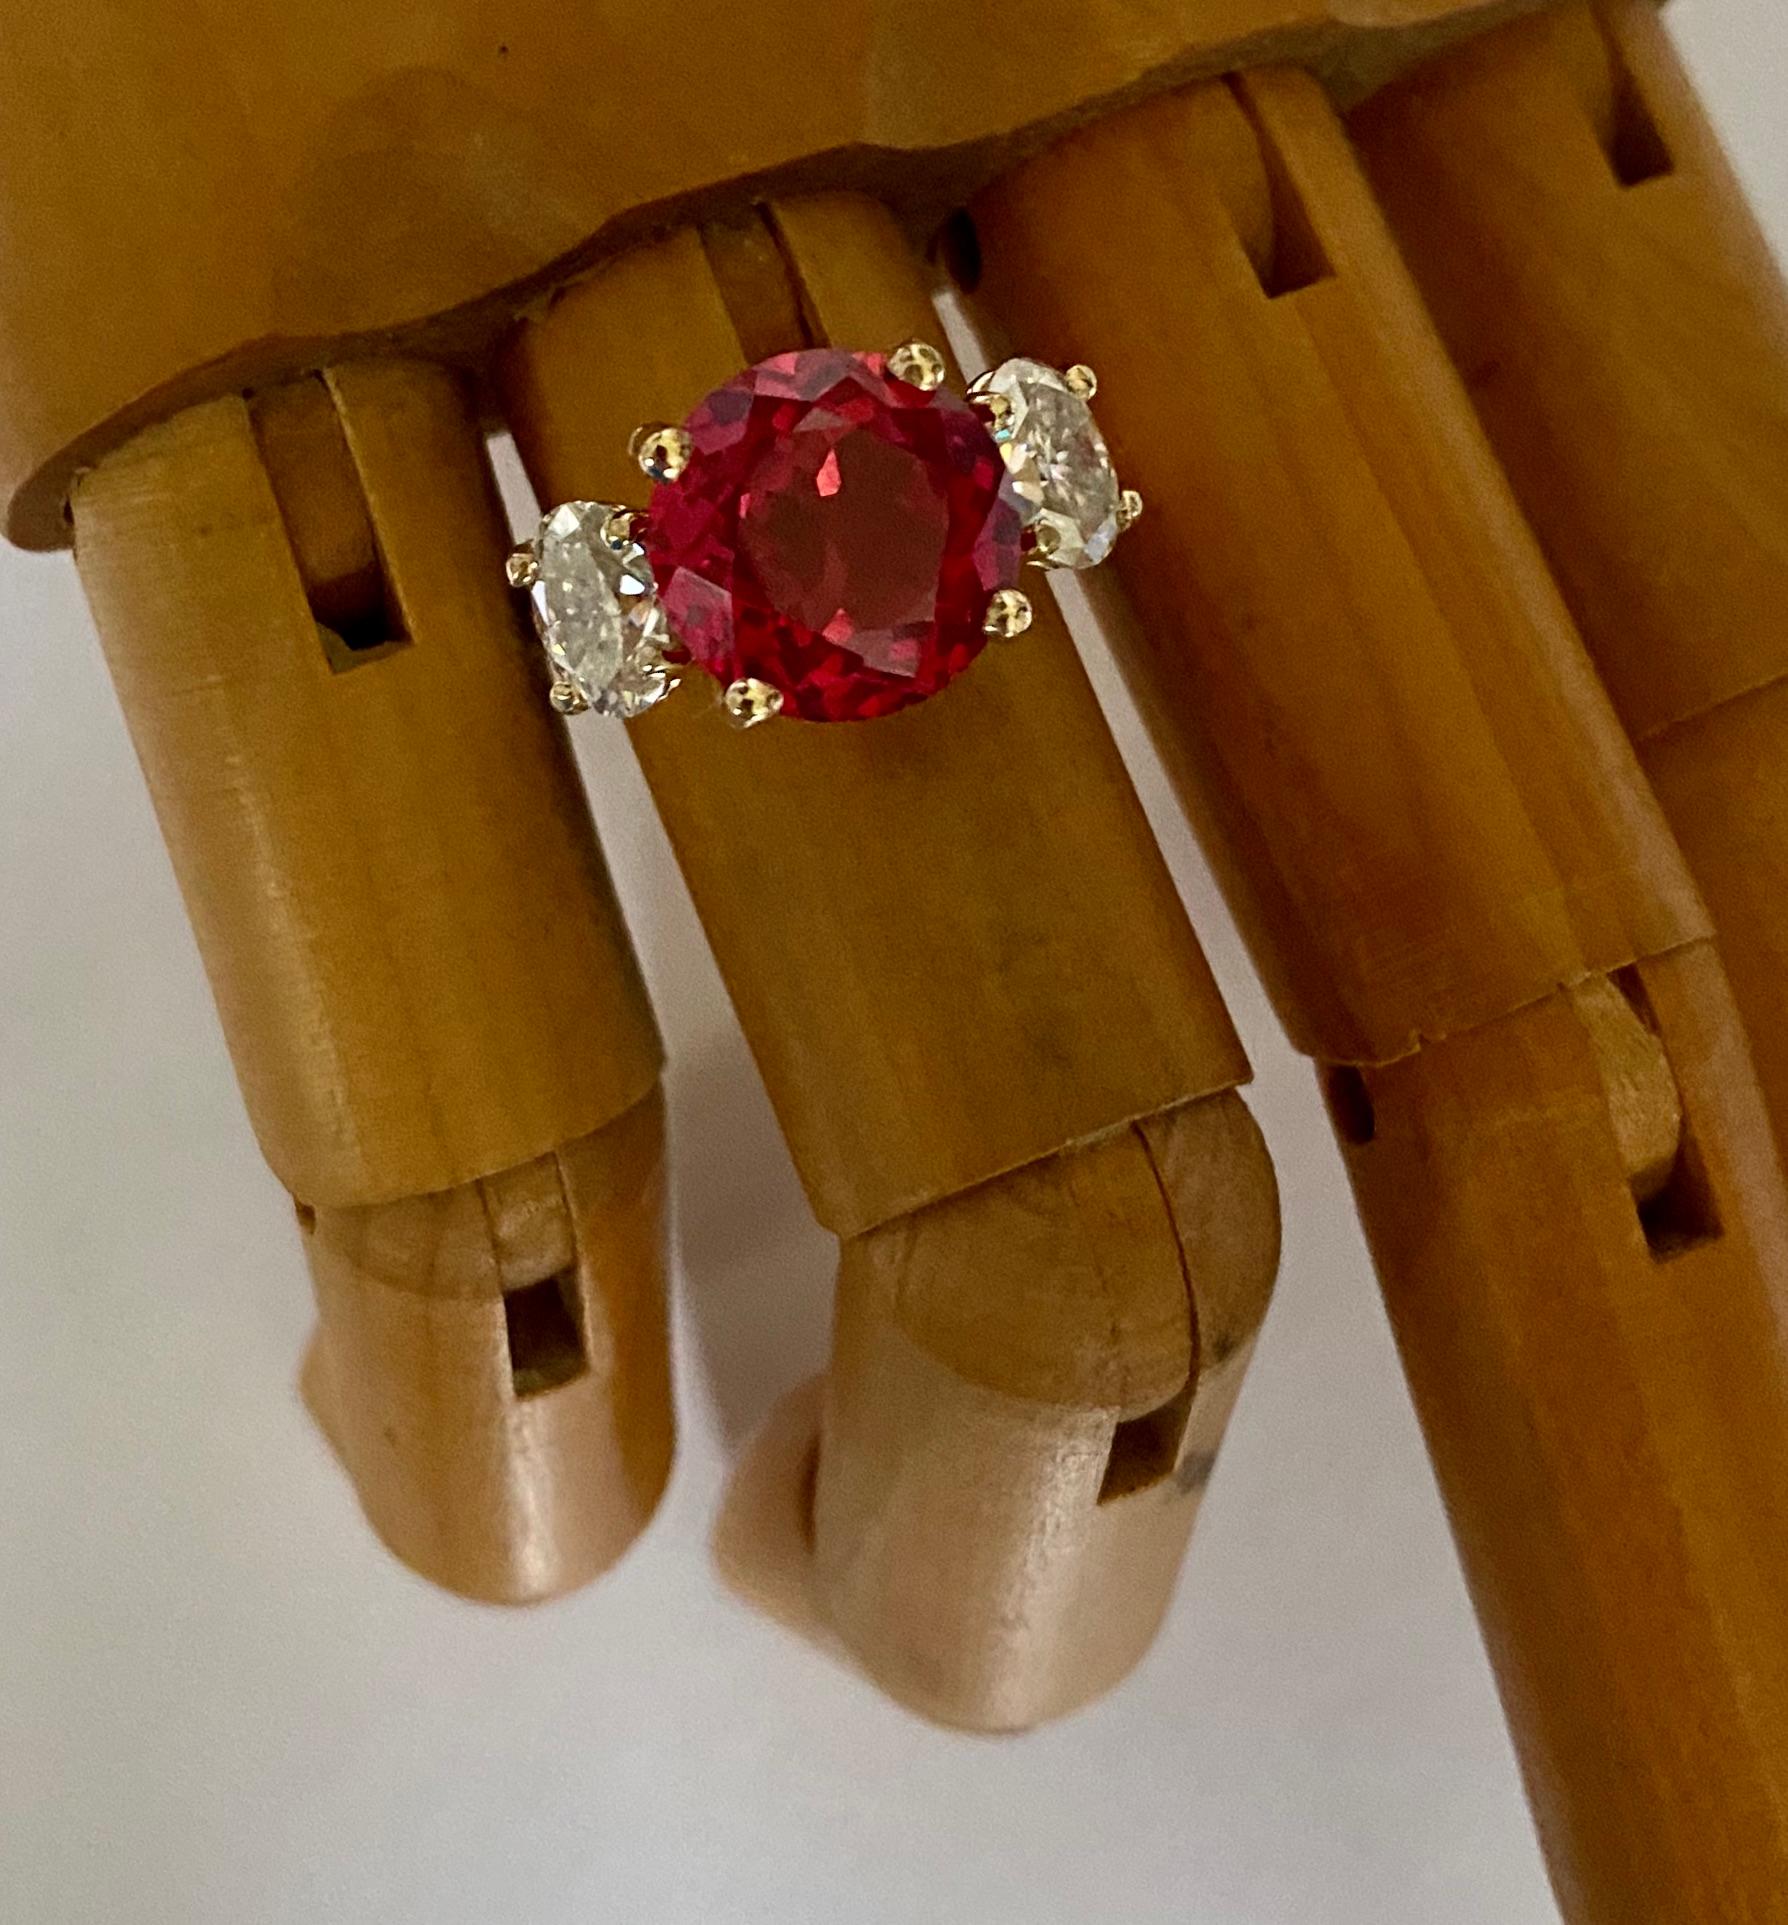 Rubellite is the featured gem in this elegant three stone ring.  Rubellite (origin: Brazil) is the red form of the larger family of tourmaline gemstones.  Tourmaline is a durable and very wearable gem.  This rubellite is bright red and fashioned